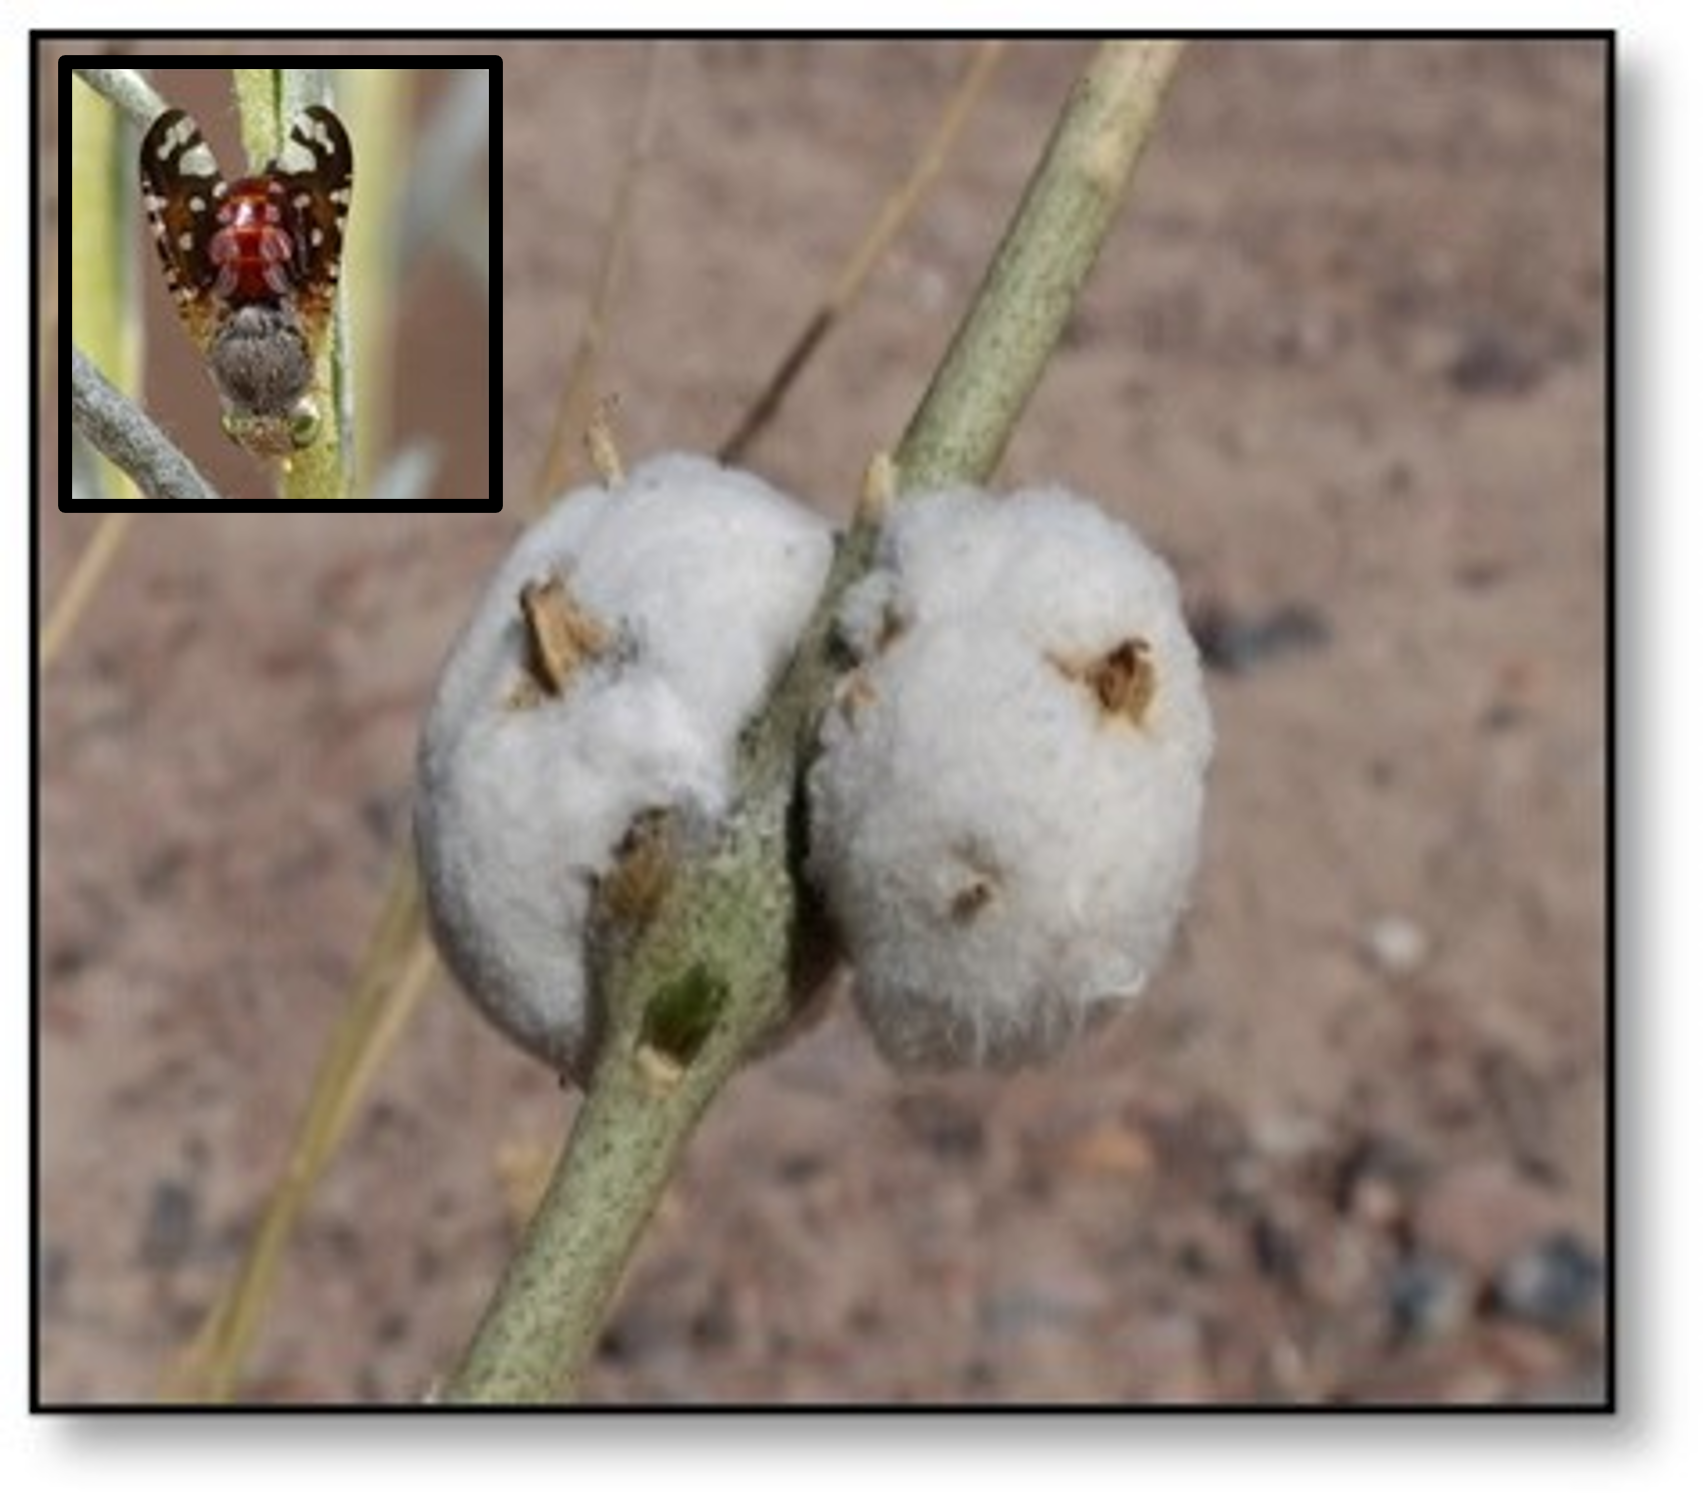 Galls on rabbitbrush from a fruit fly, with fly shown in inset.